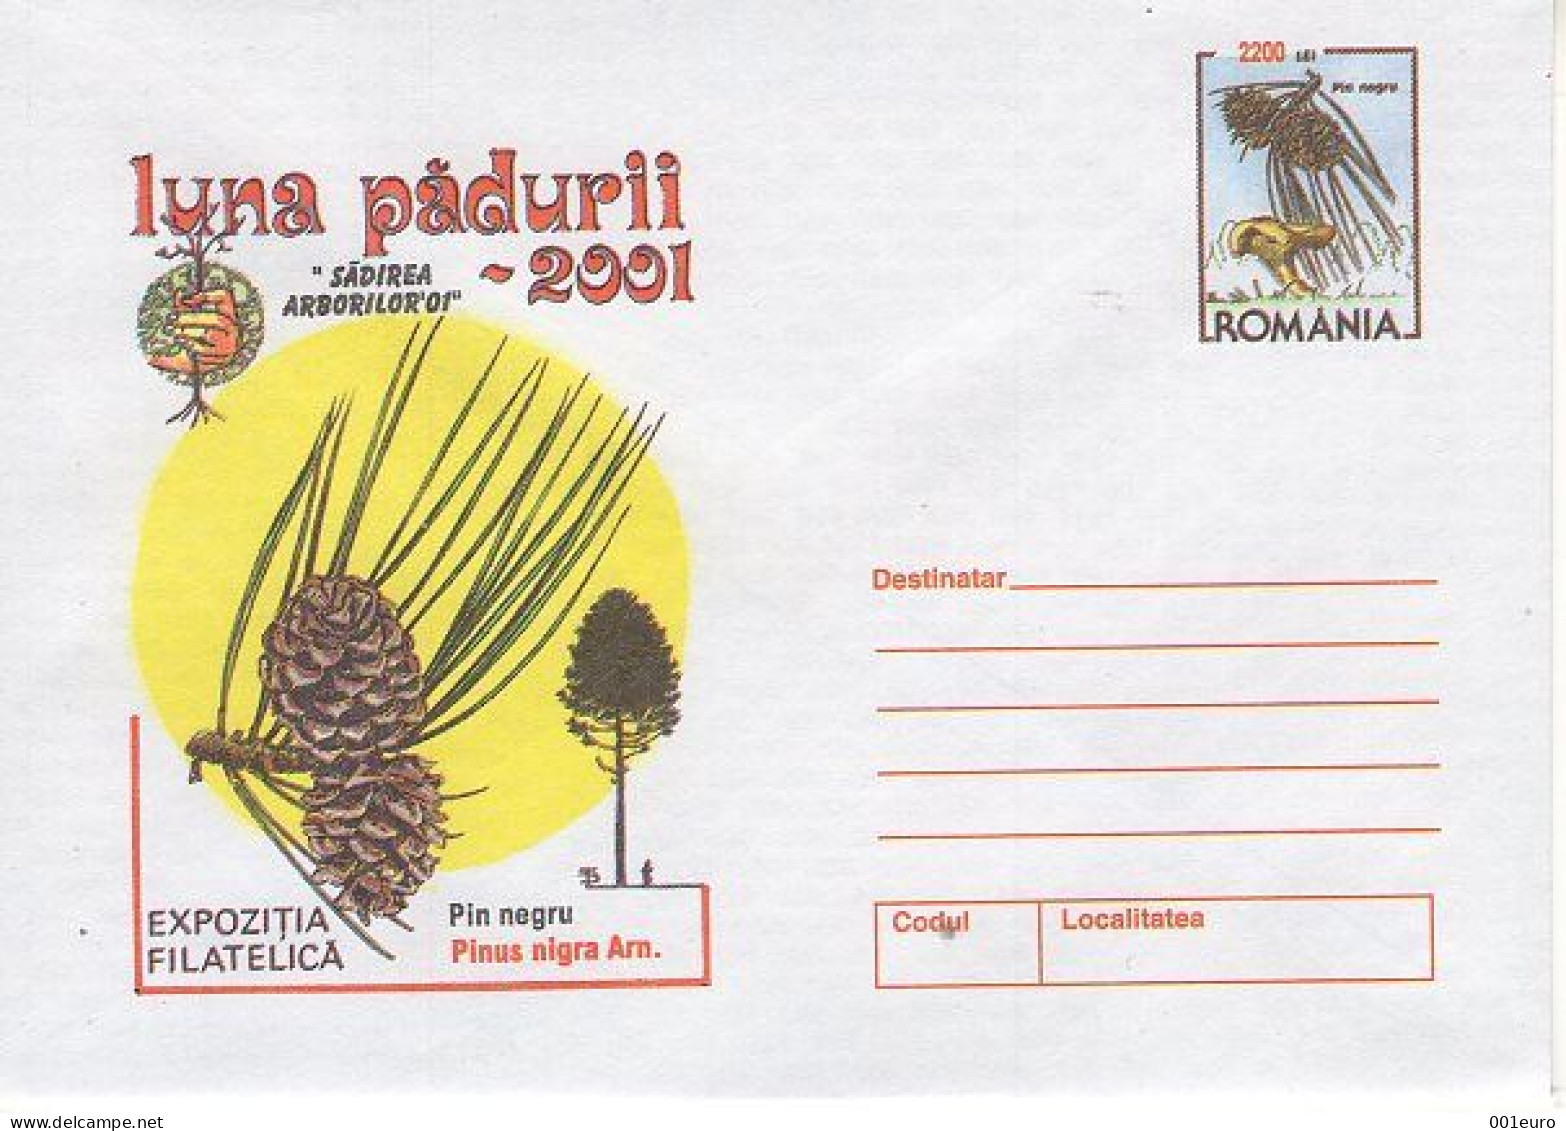 ROMANIA 2001: FOREST MONTH - TREE & MUSHROOMS 3 Unused Prepaid Postal Stationery Covers - Registered Shipping! - Entiers Postaux